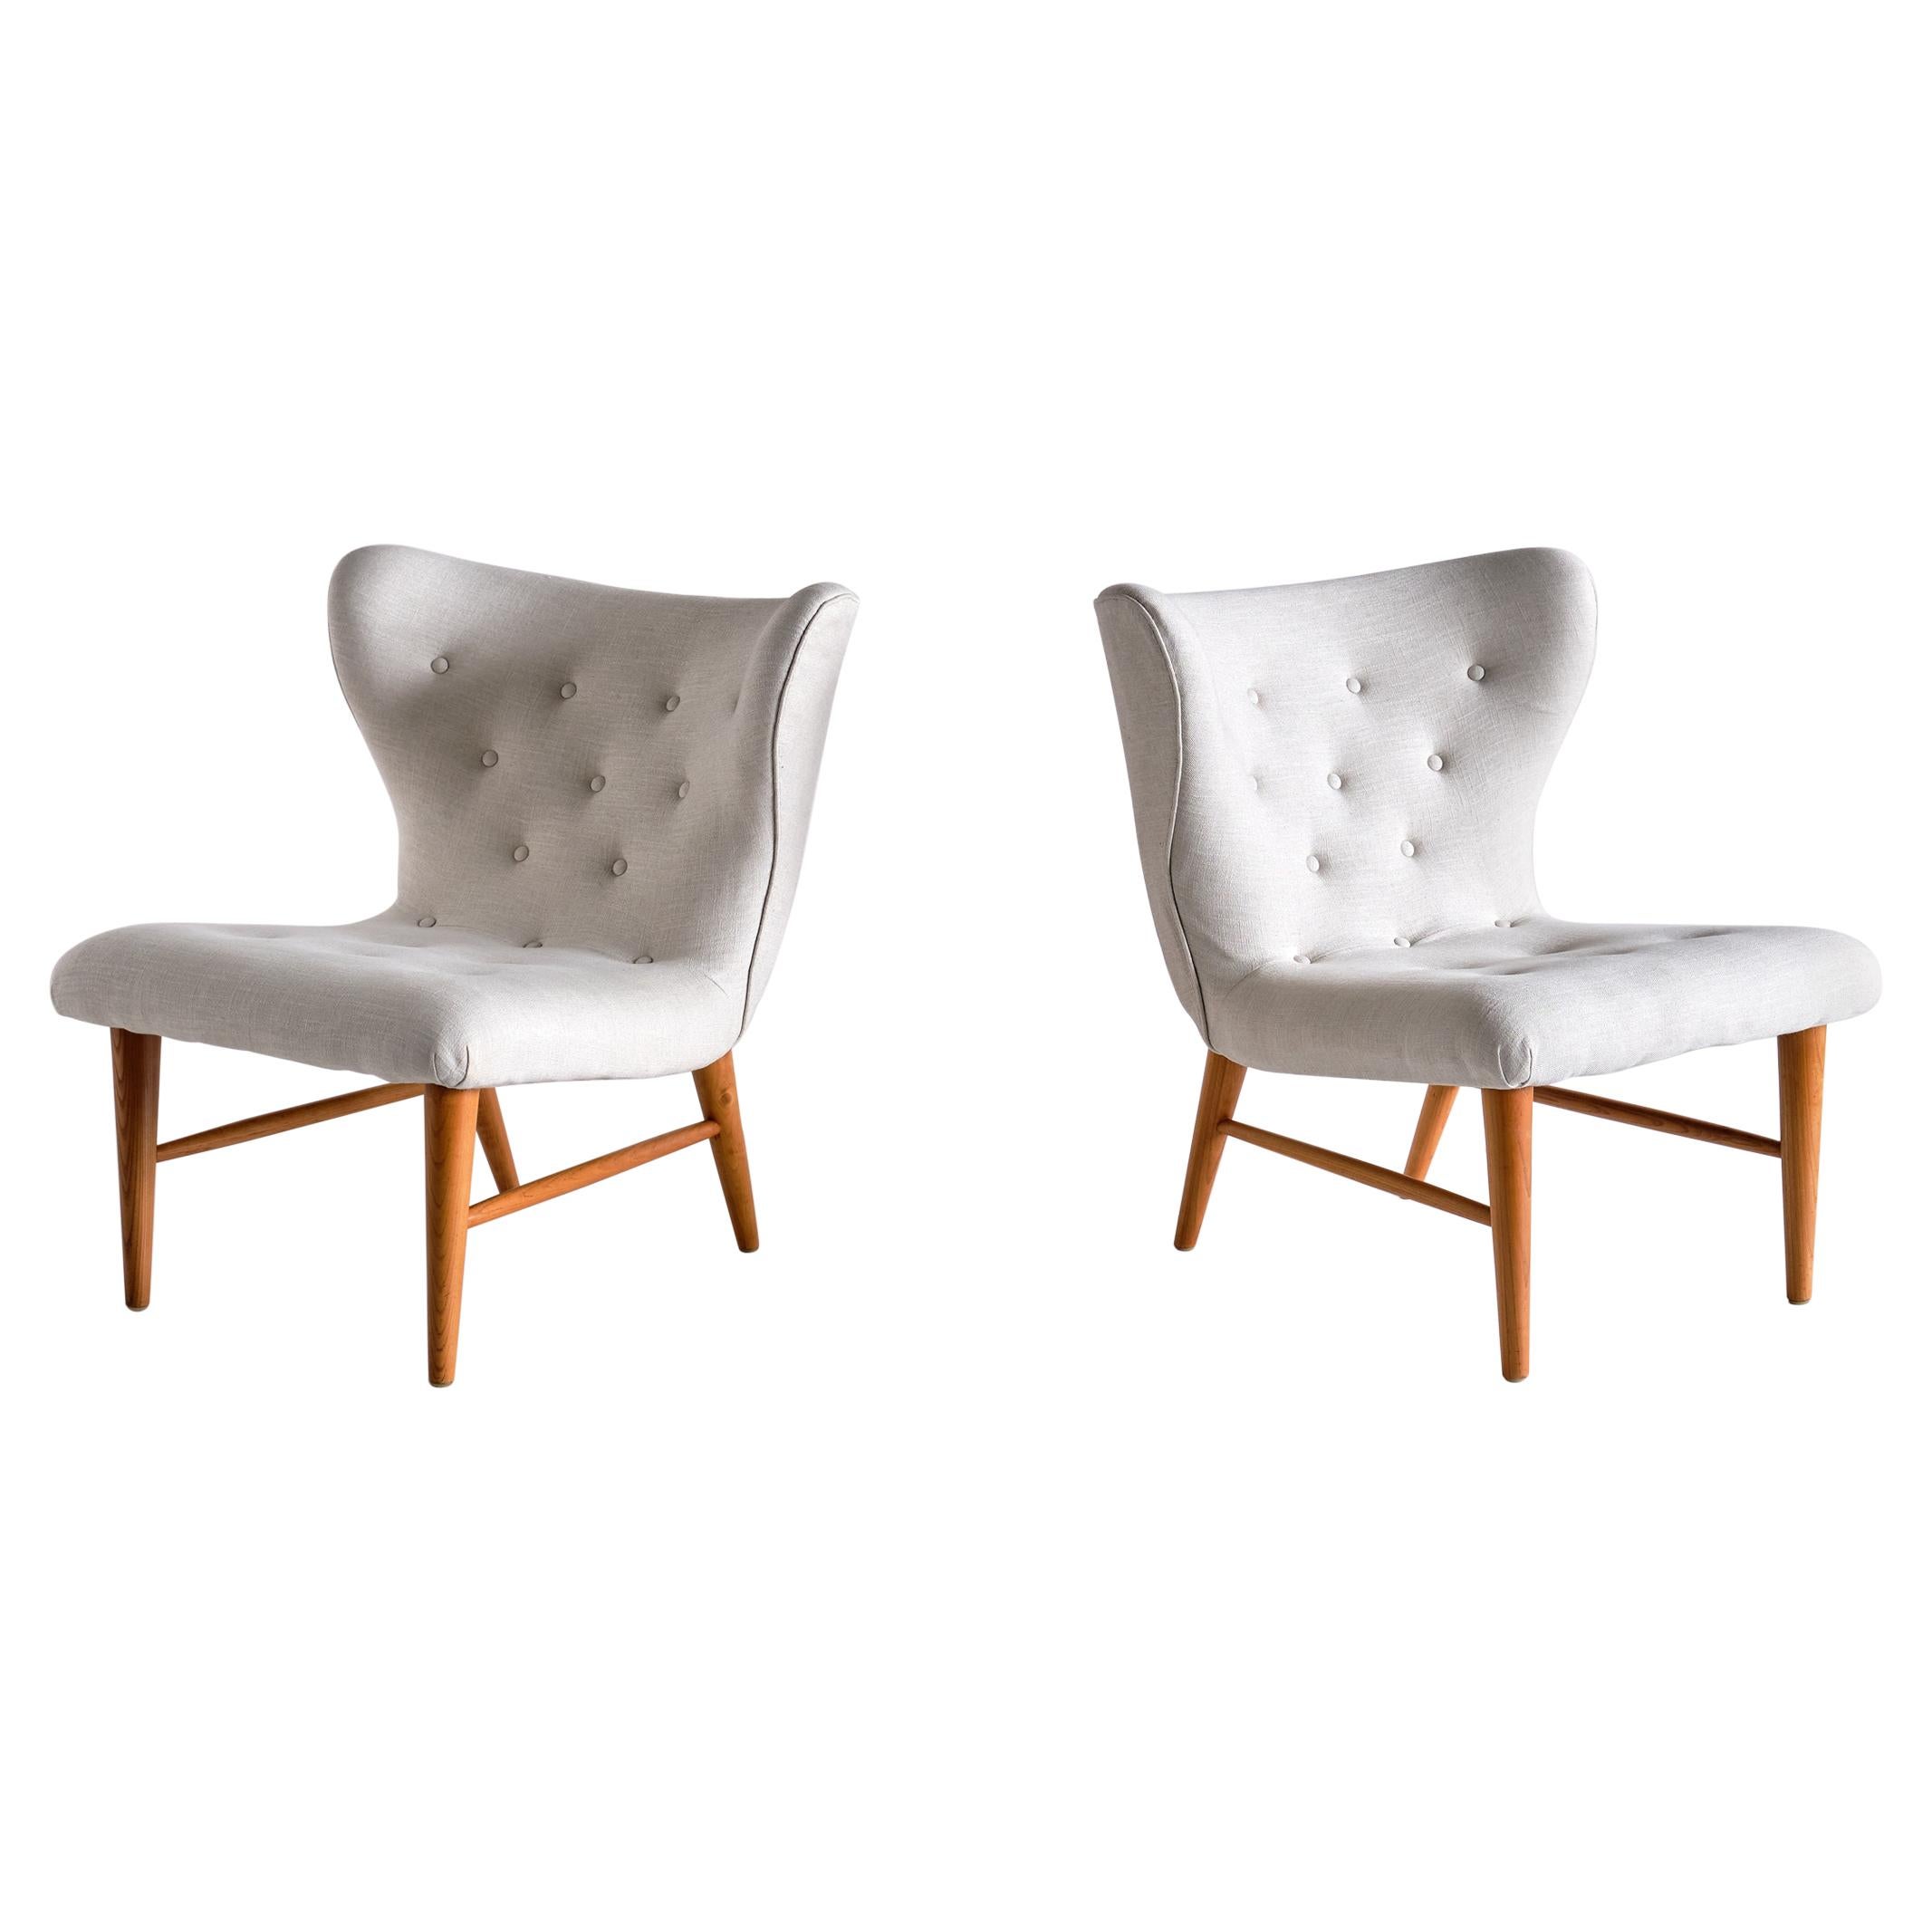 Eric Bertil Karlén Pair of Lounge Chairs in Ivory Linen and Elm, Sweden, 1940s For Sale